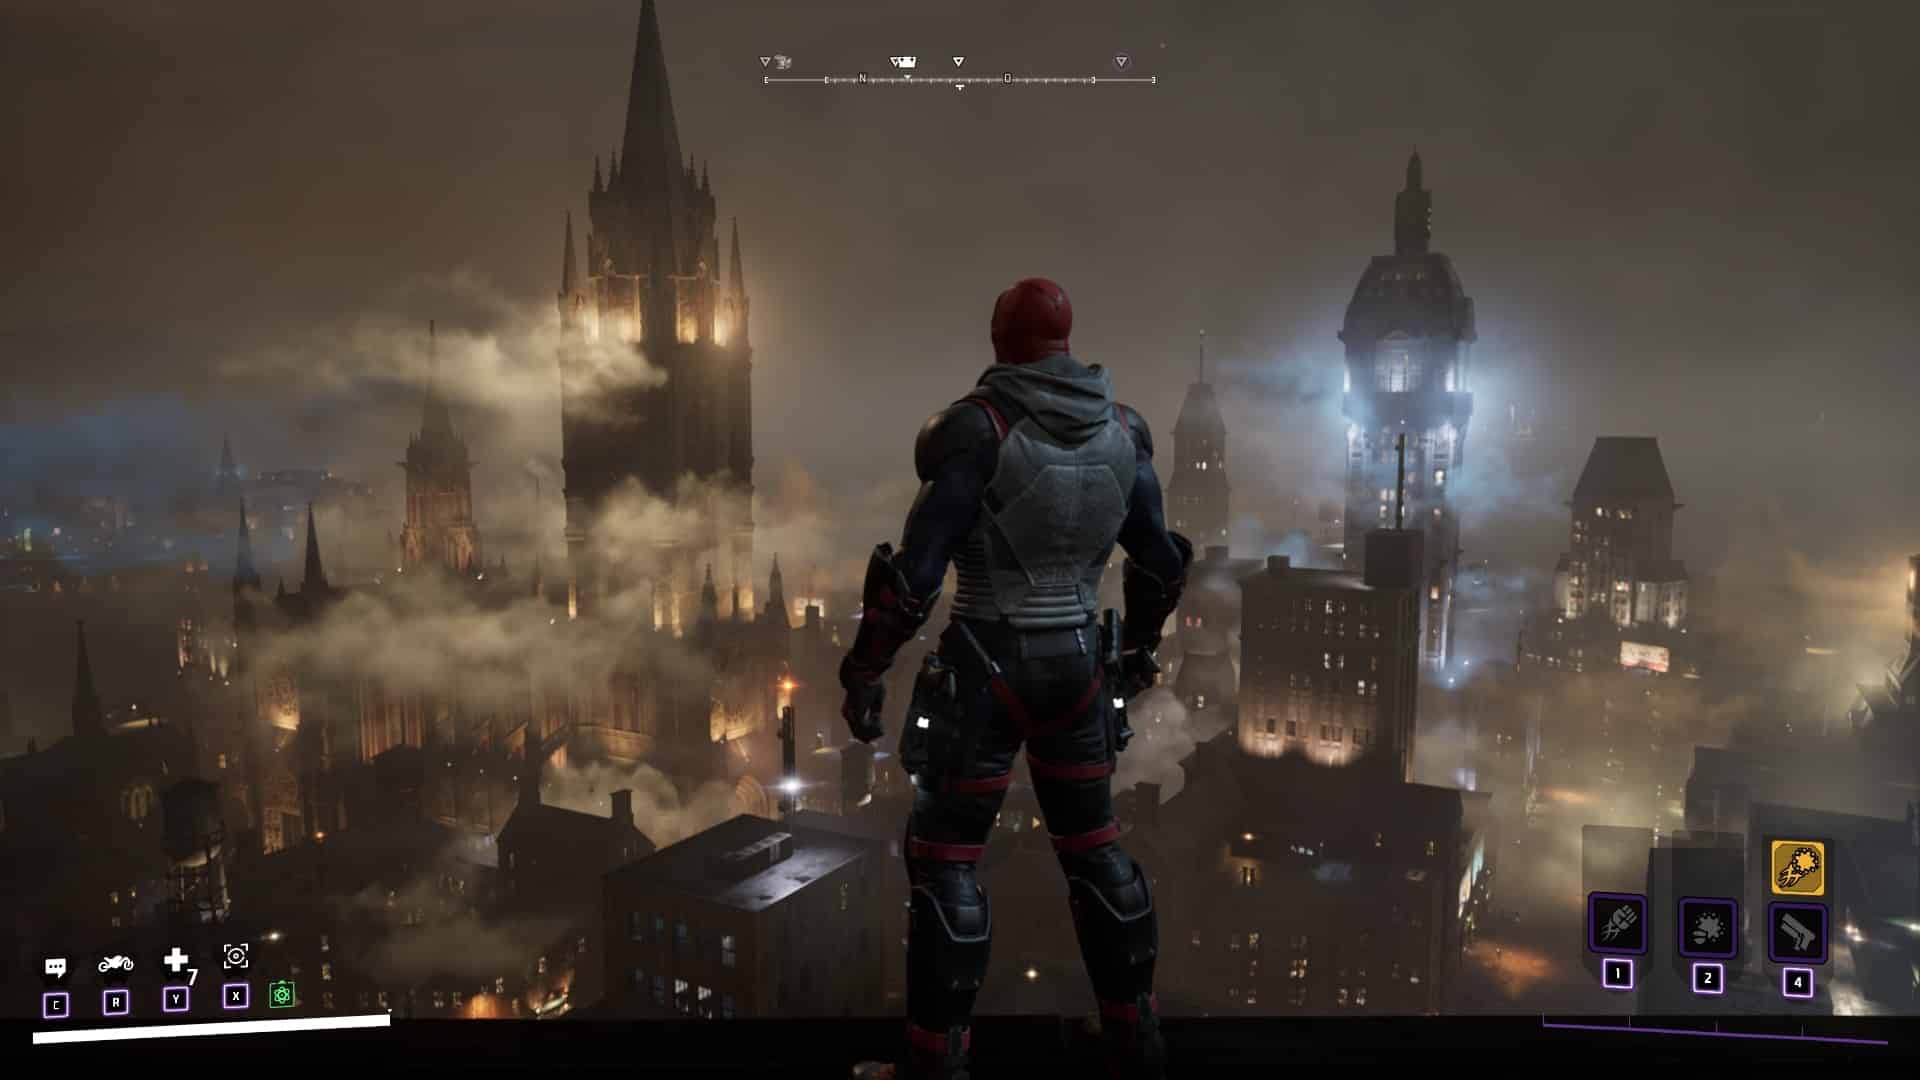 (The view of Gotham at night really sets the mood.)